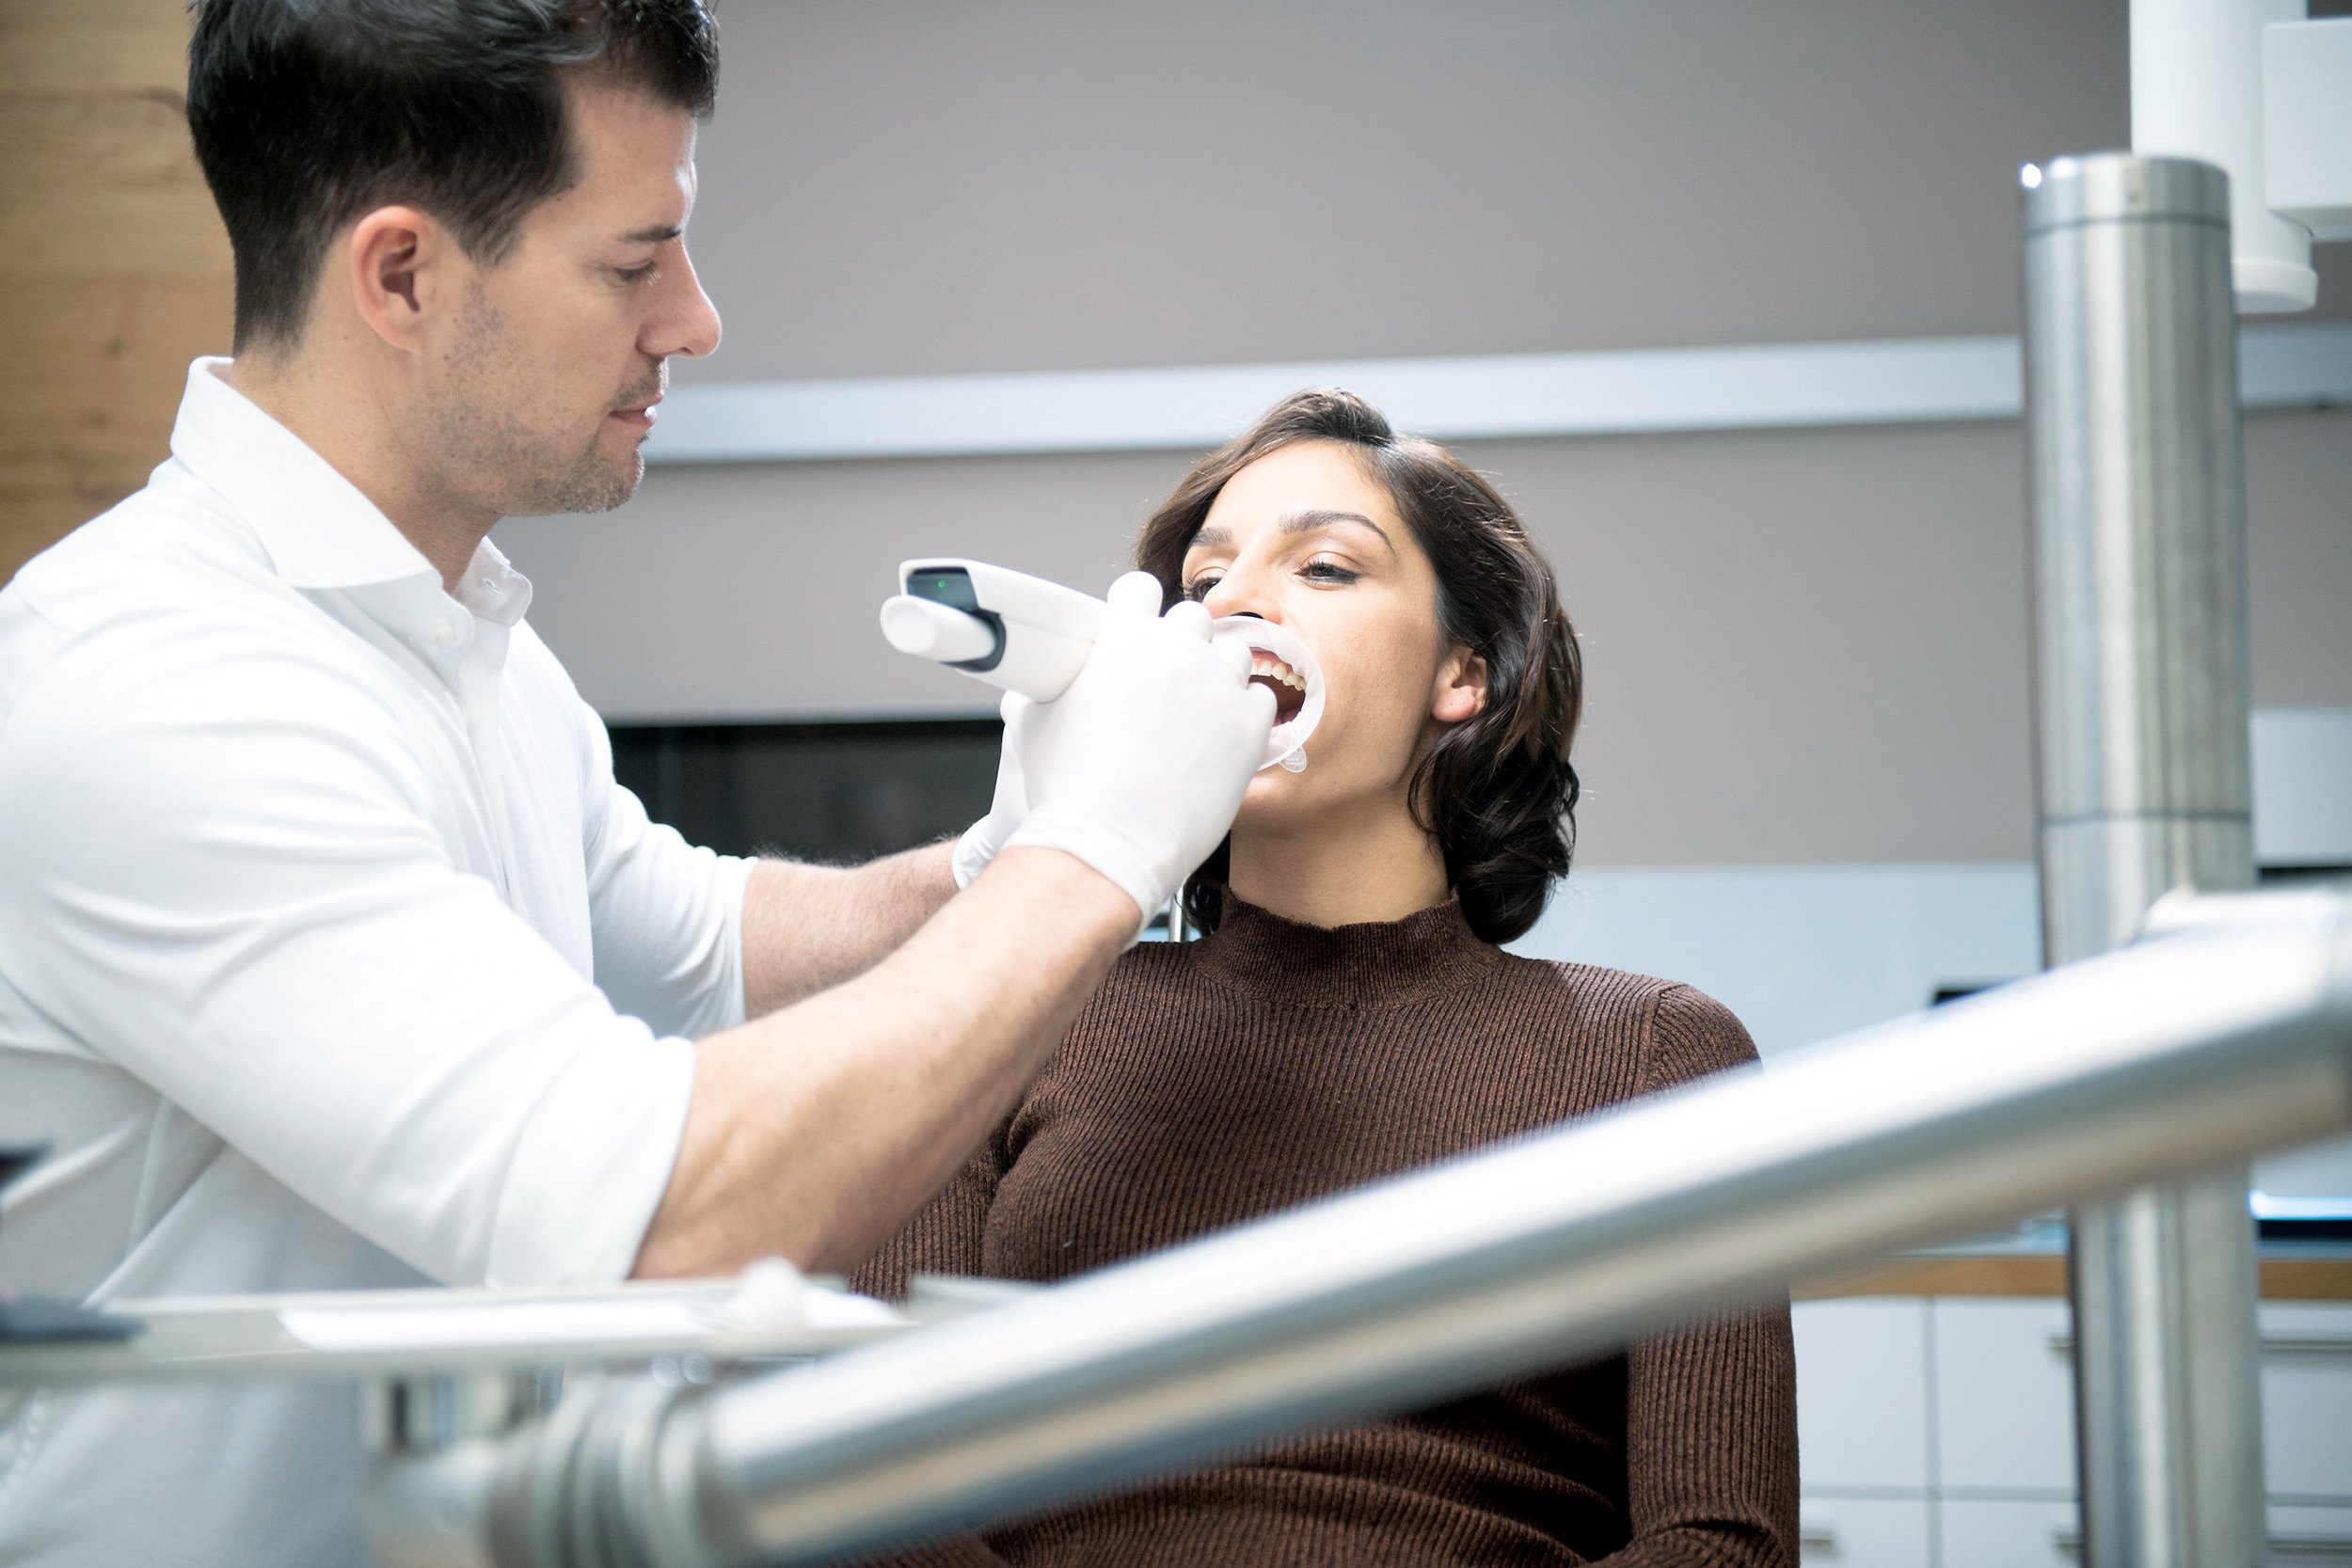 PrograScan One+ optimizes comfort for both dentists and patients.